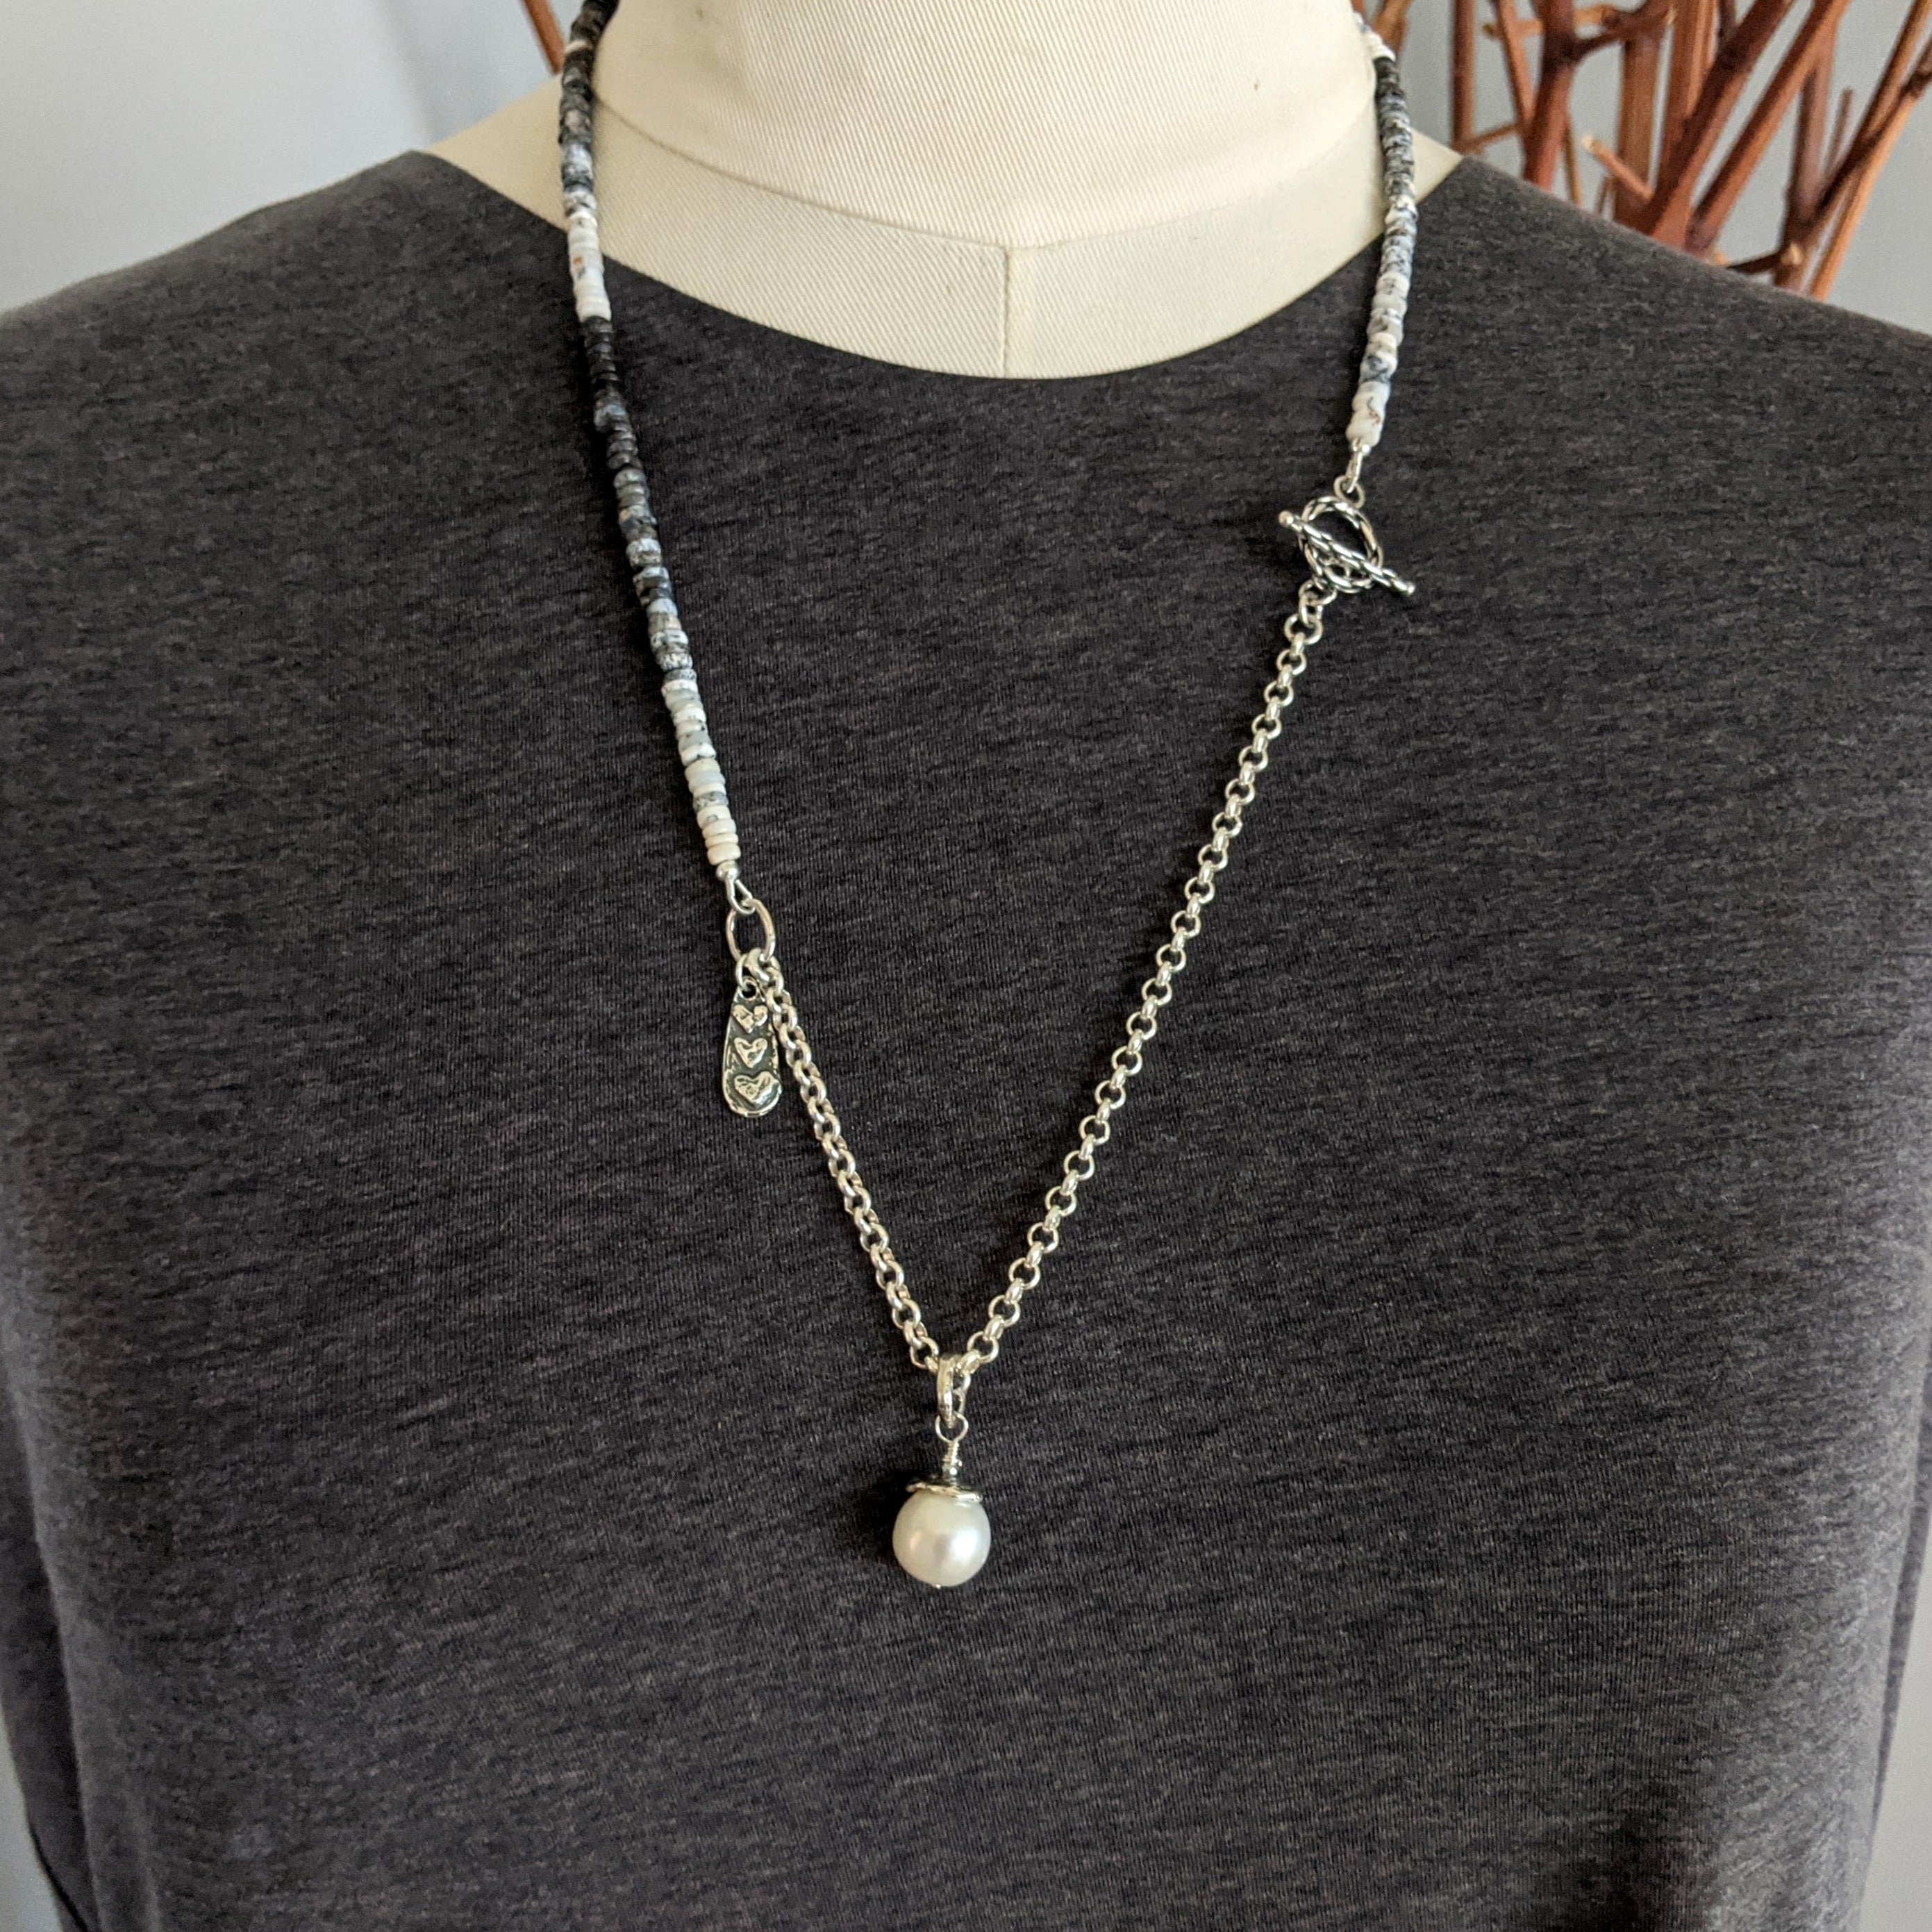 Handmade artisan long grey gemstone  necklace with dendritic opal, white Edison pearl pendant and sterling silver, design and handcrafted by Aurora Creative Jewellery.